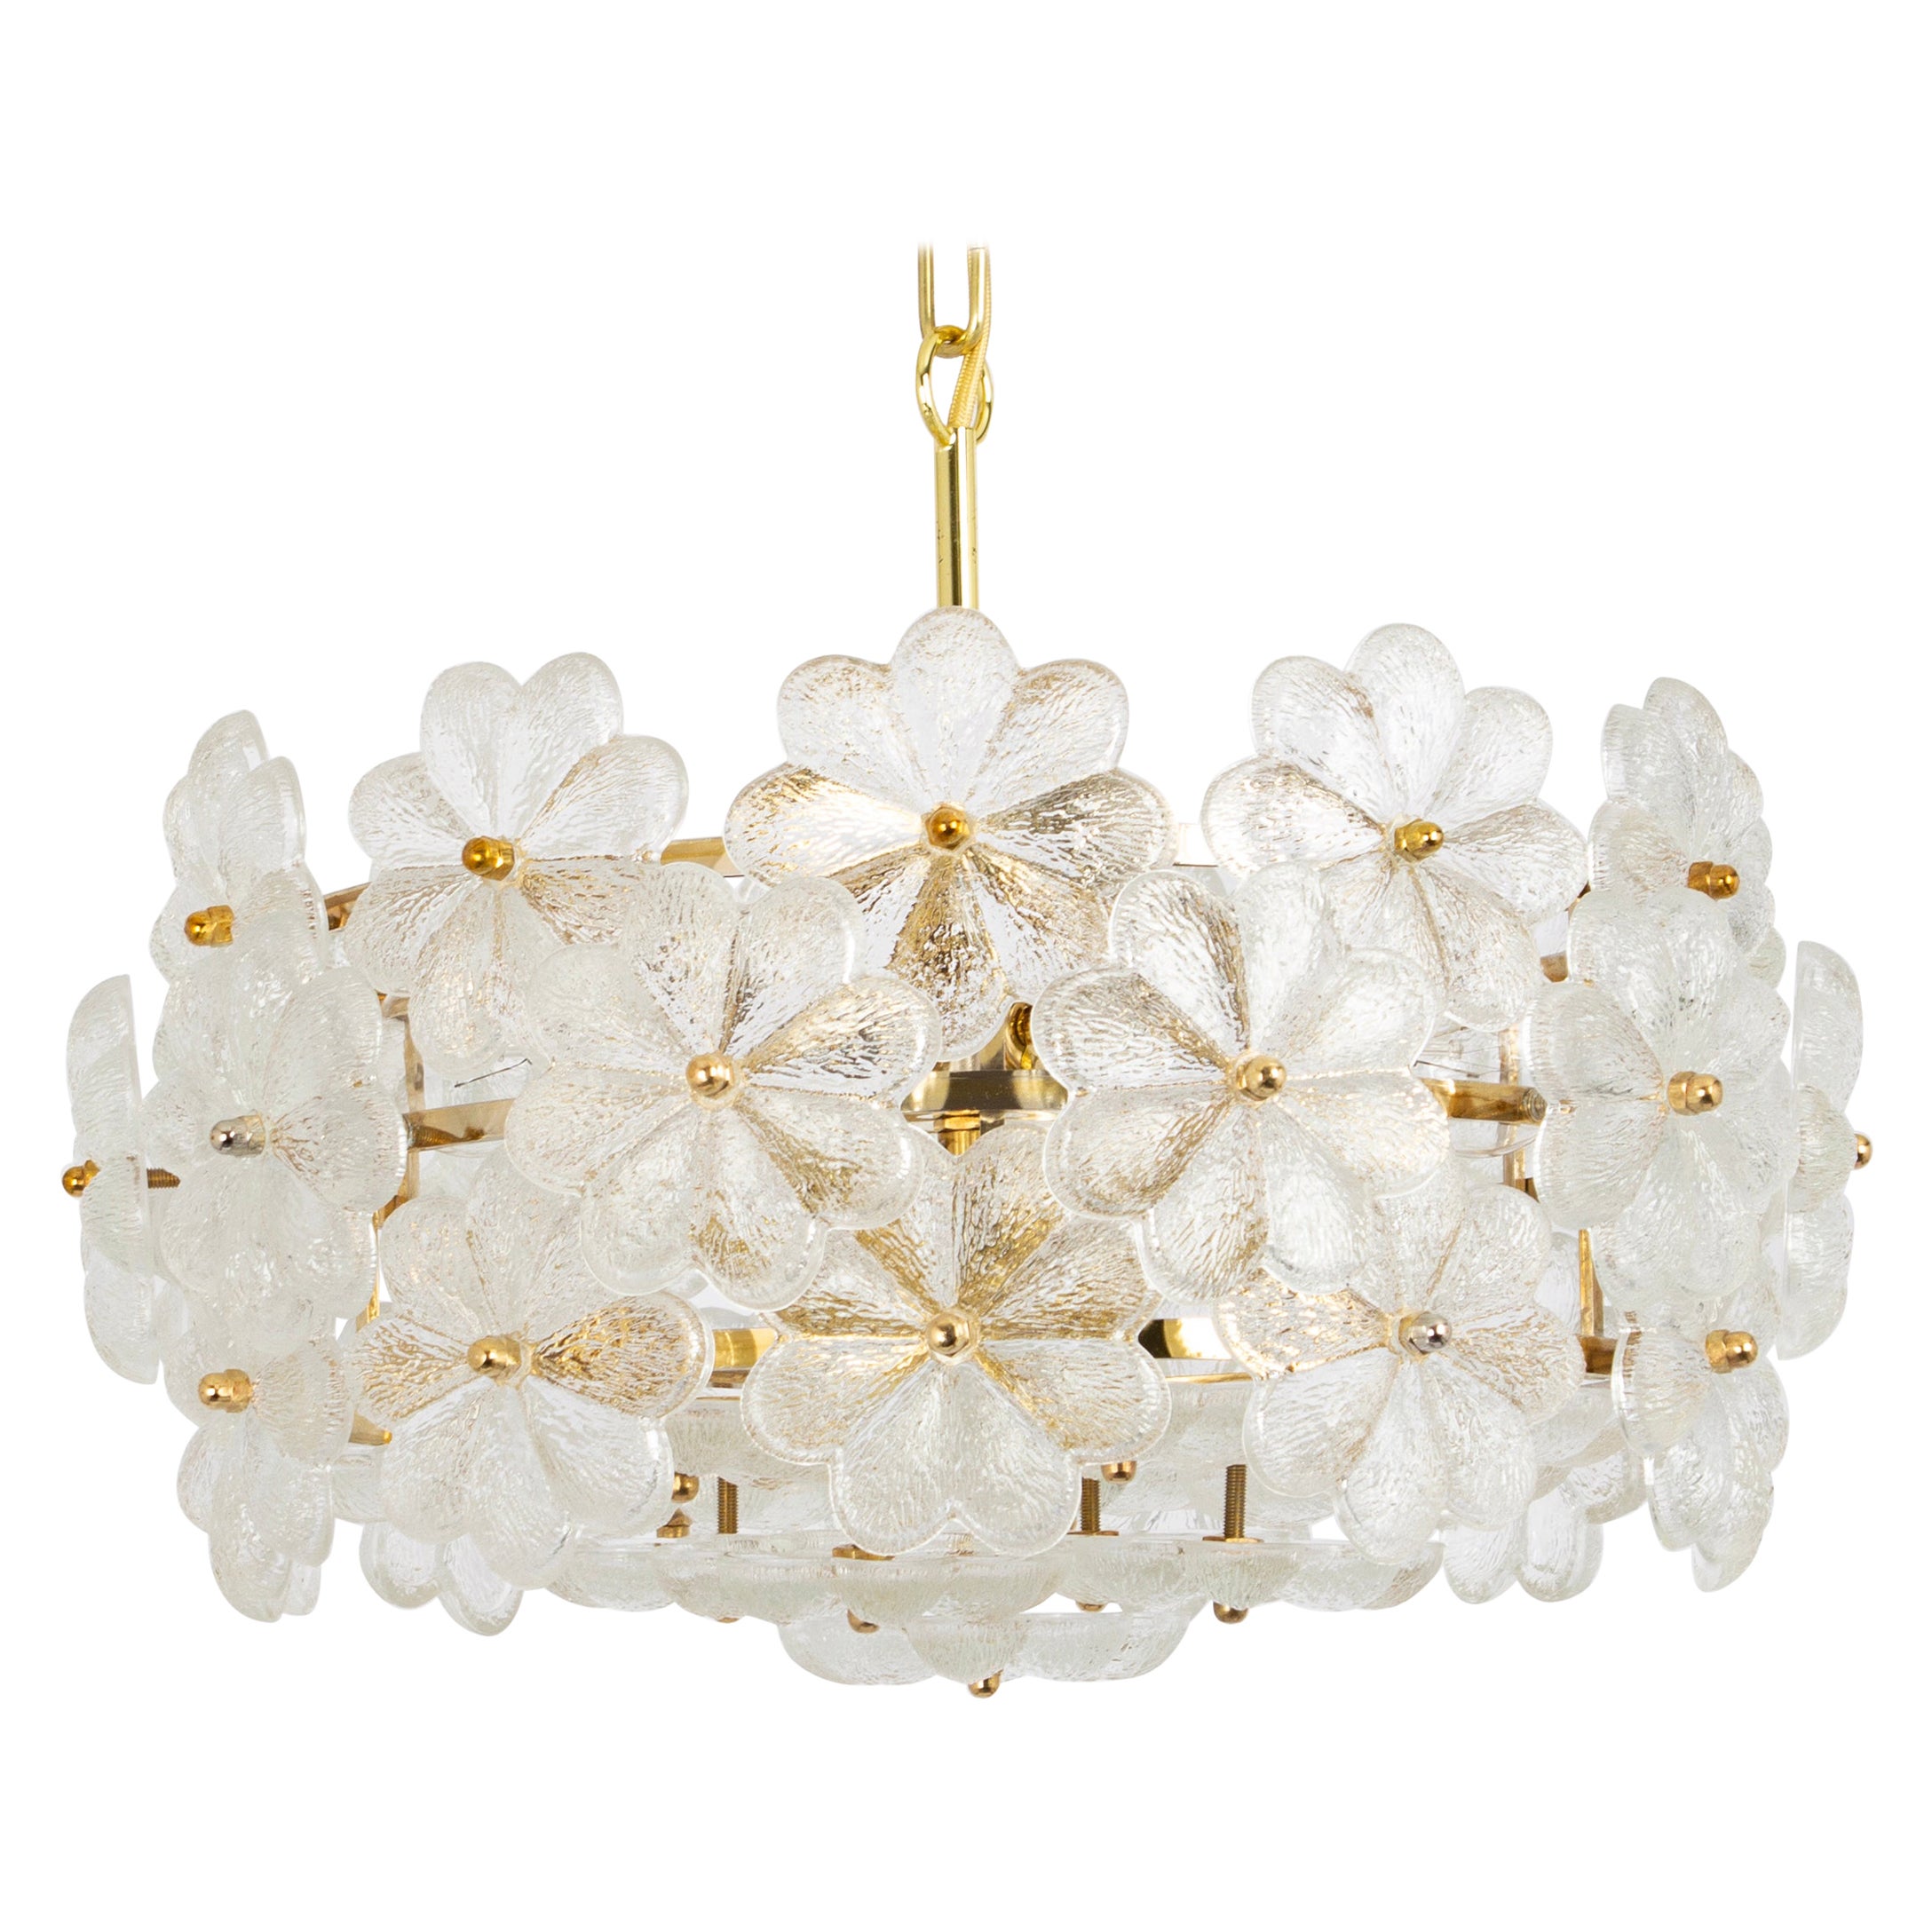 1 of 2 Stunning Petite Murano Glass Chandelier by Ernst Palme, Germany, 1970s For Sale